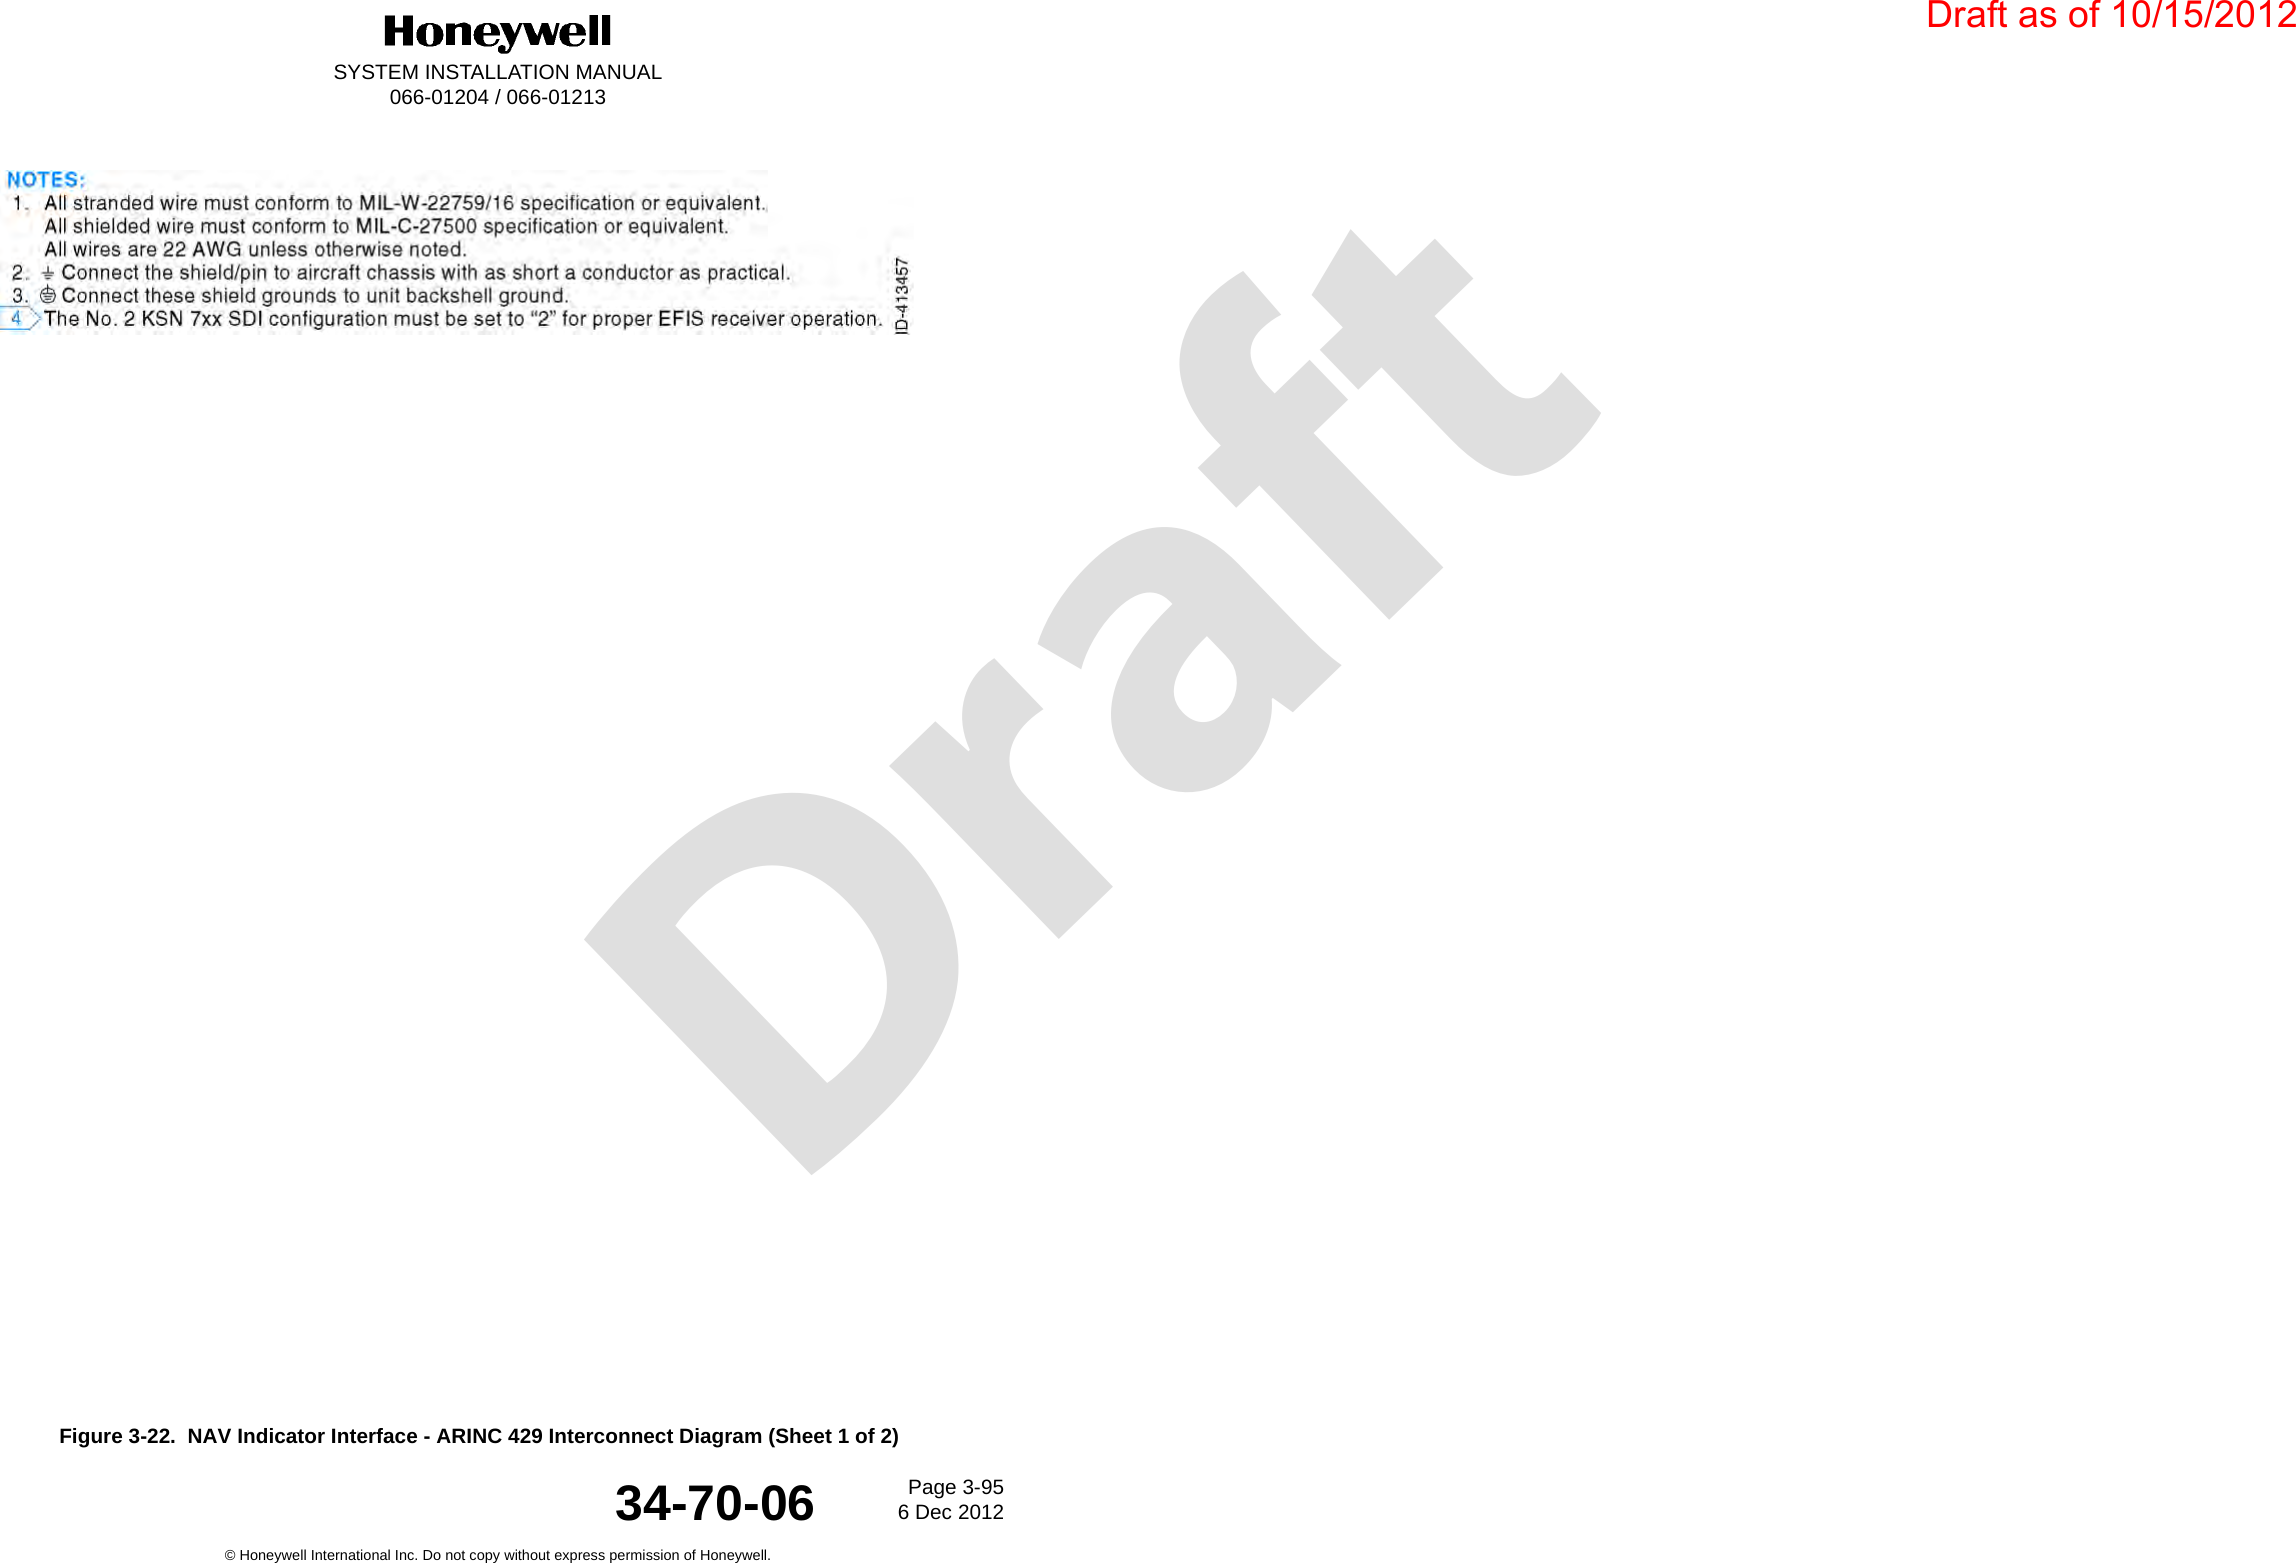 DraftSYSTEM INSTALLATION MANUAL066-01204 / 066-01213Page 3-956 Dec 2012© Honeywell International Inc. Do not copy without express permission of Honeywell.34-70-06Figure 3-22.  NAV Indicator Interface - ARINC 429 Interconnect Diagram (Sheet 1 of 2)Draft as of 10/15/2012